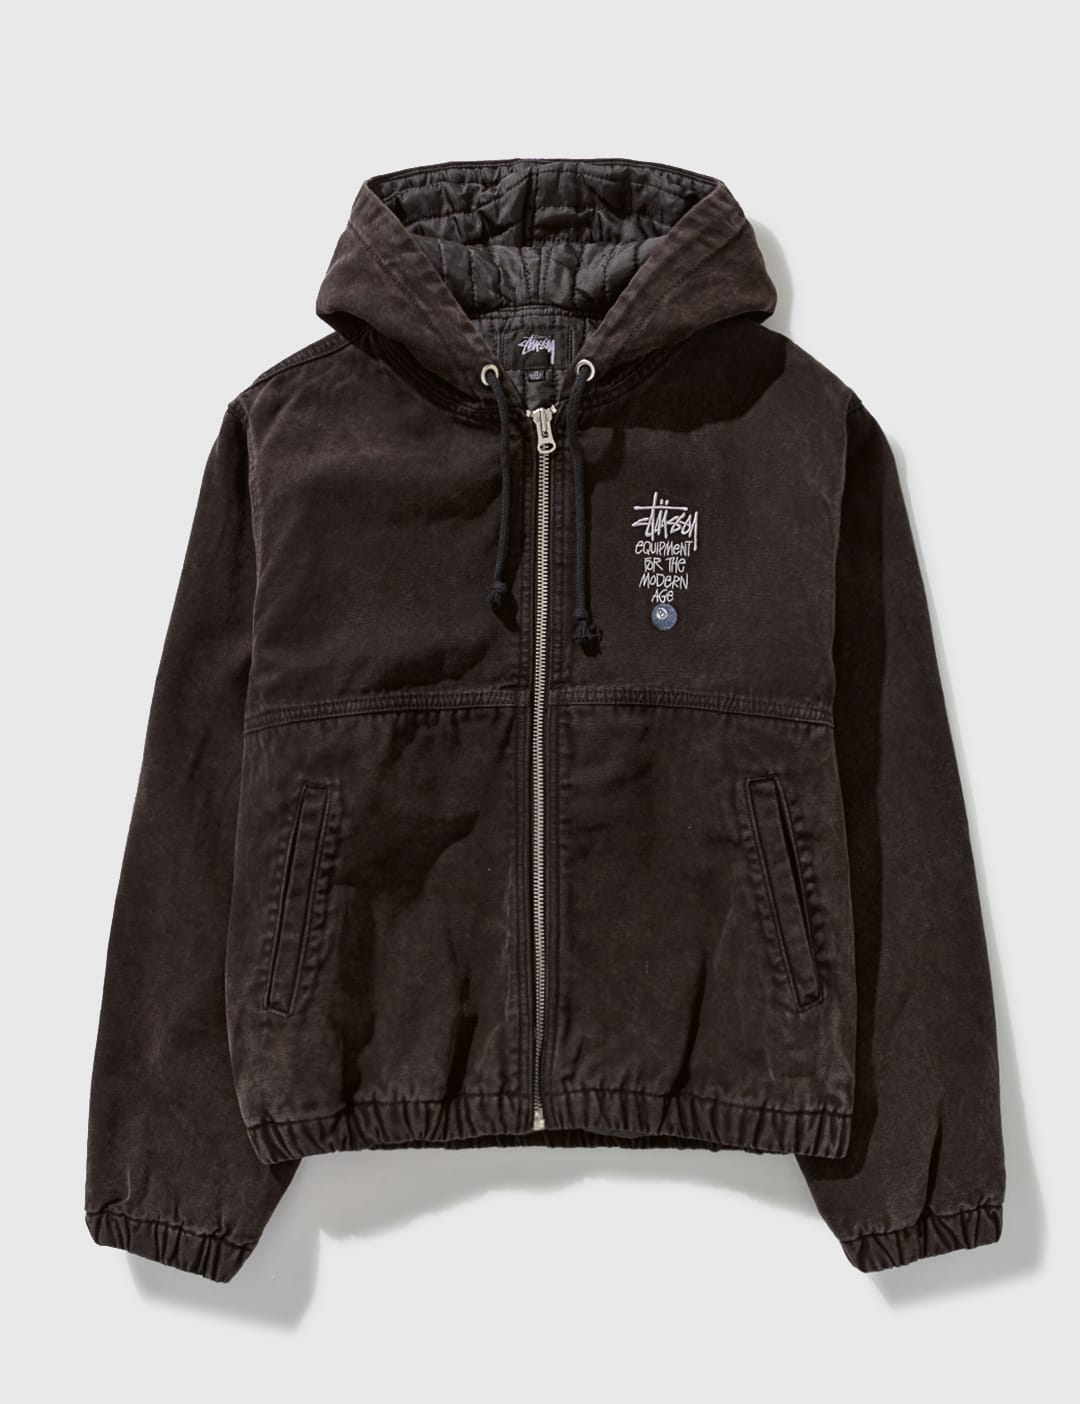 Stüssy - Canvas Insulated Work Jacket | HBX - Globally Curated 